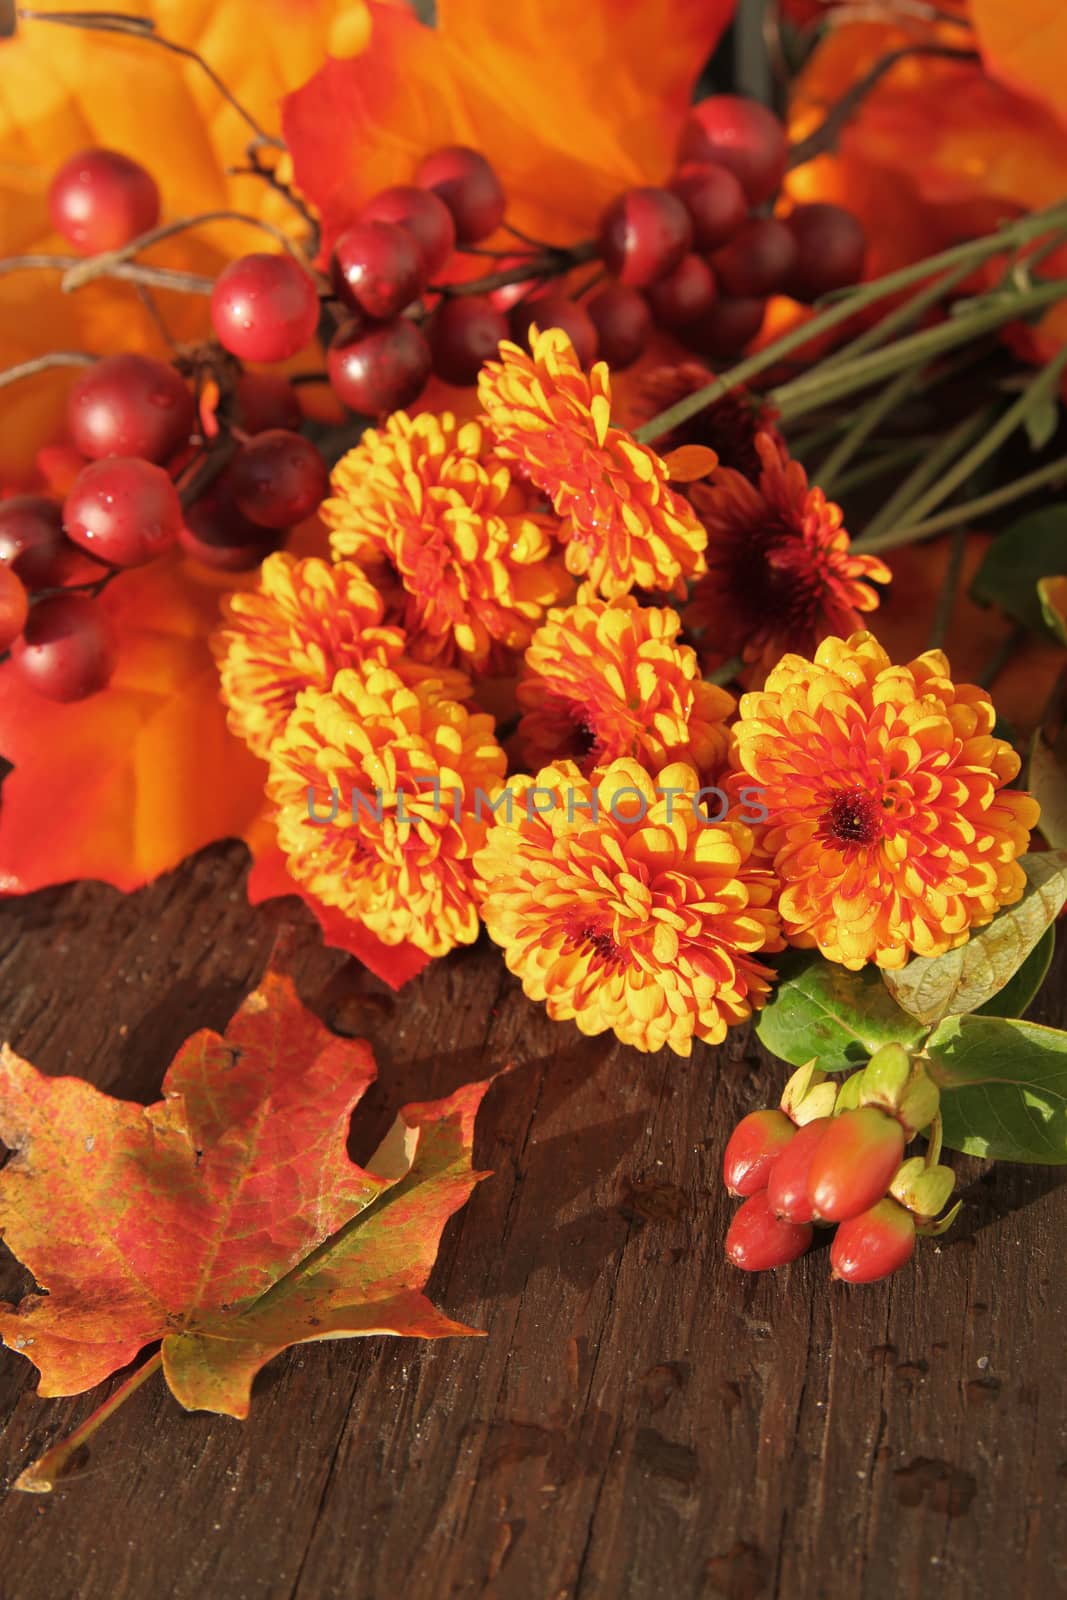 Fall or autumn flowers, and berries with orange leaves on a wooden background